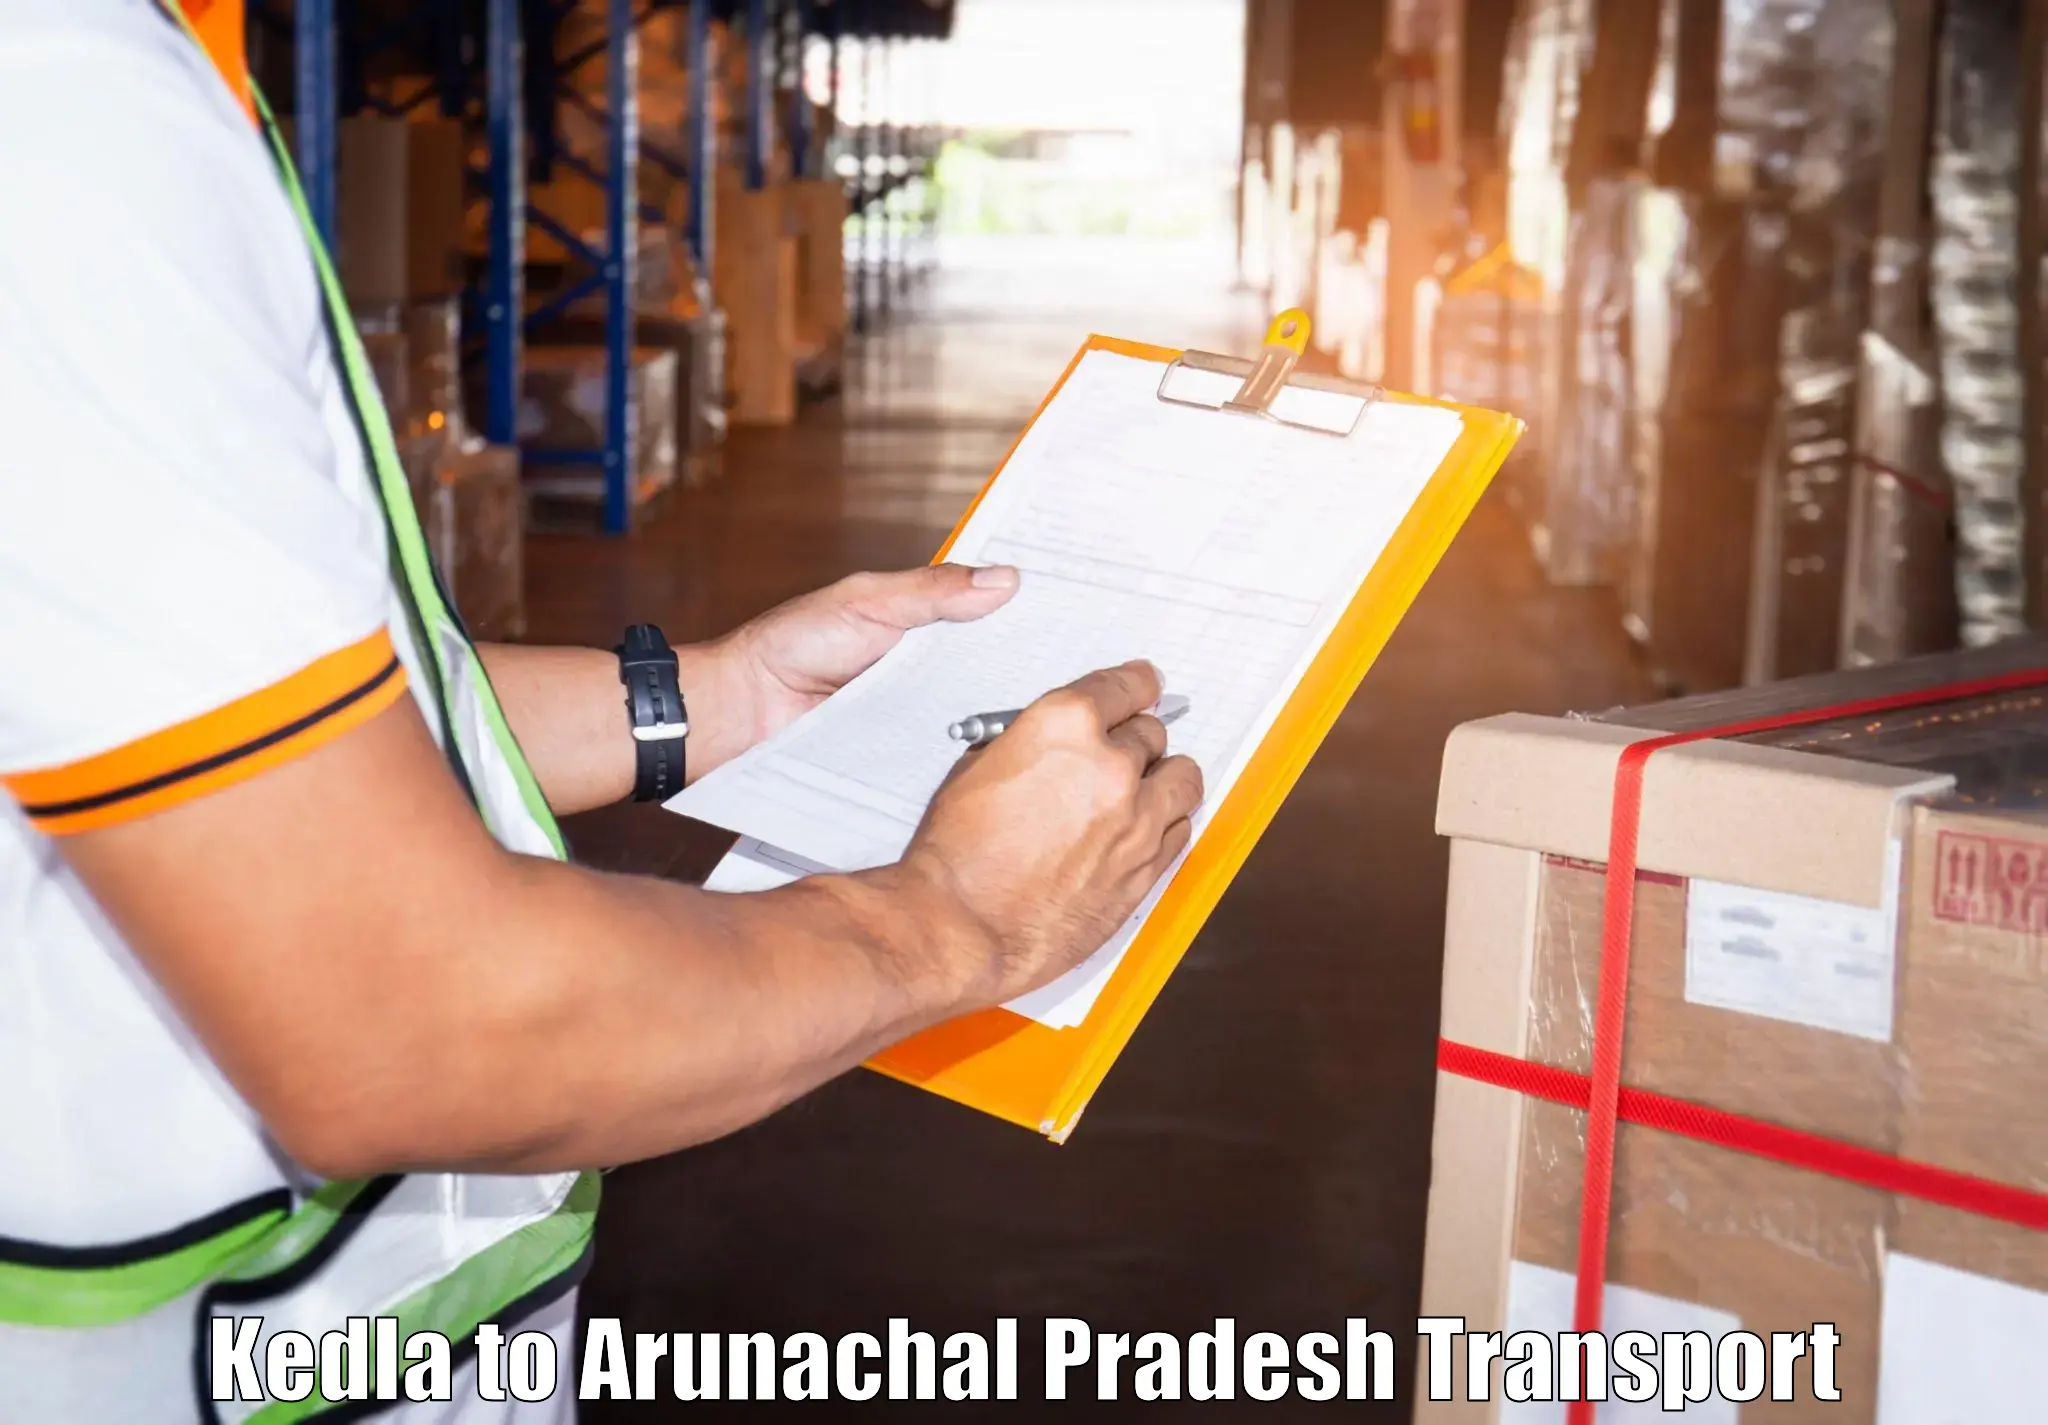 Part load transport service in India Kedla to Deomali